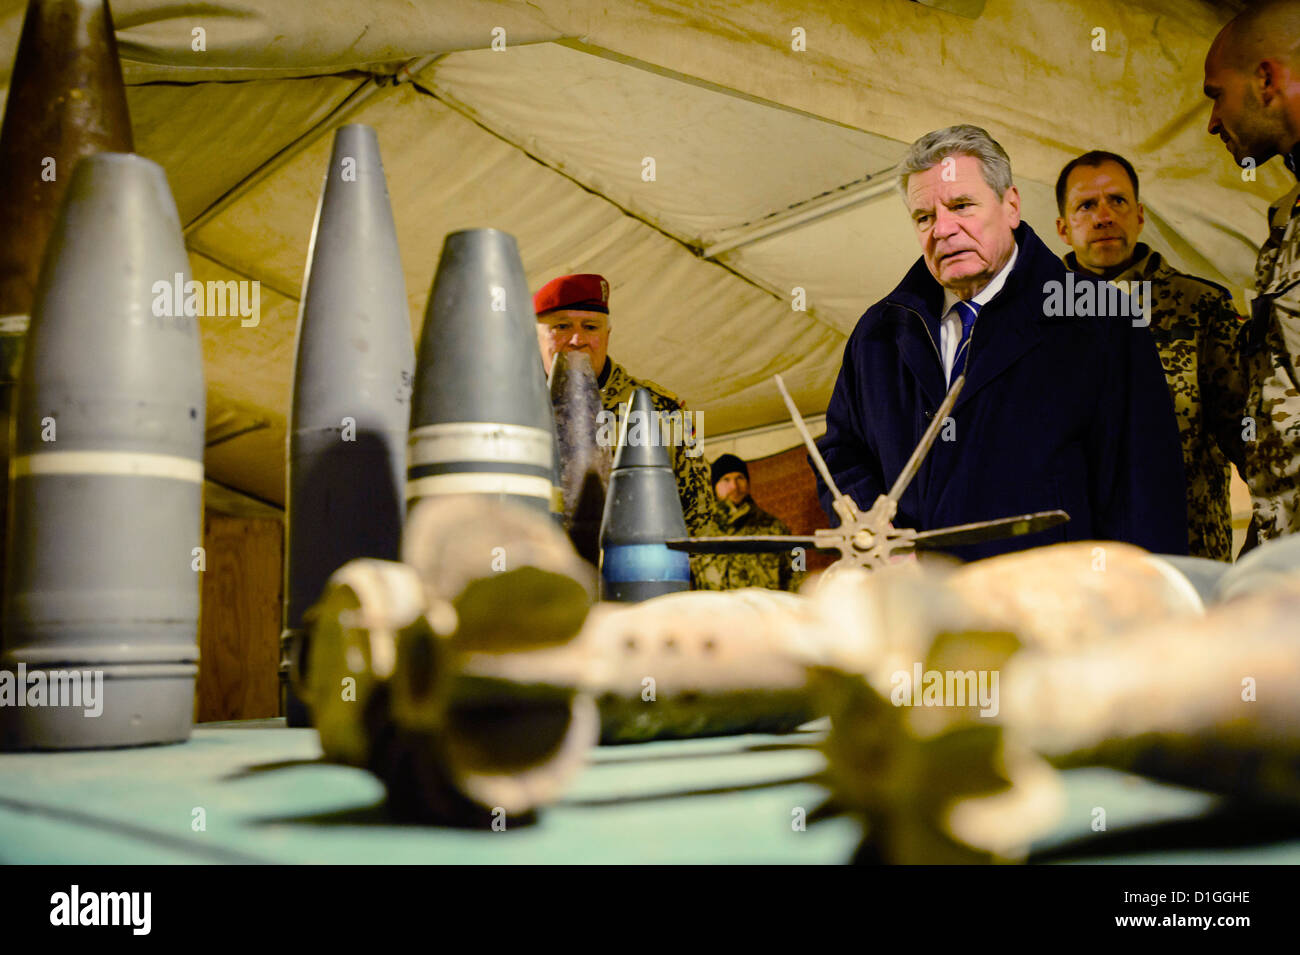 HANDOUT - A handout picture shows German President Joachim Gauck being briefed on the dangers and the removal of Improvised Explosive Devices (IED) at camp Marmal in Mazar-i-Sharif, Germany, 19 December 2012. Gauck is currently visiting soldiers of the German Armed Forces deployed at the Hindu Kush. Photo: BUNDESREGIERUNG/STEFFEN KUGLER Stock Photo